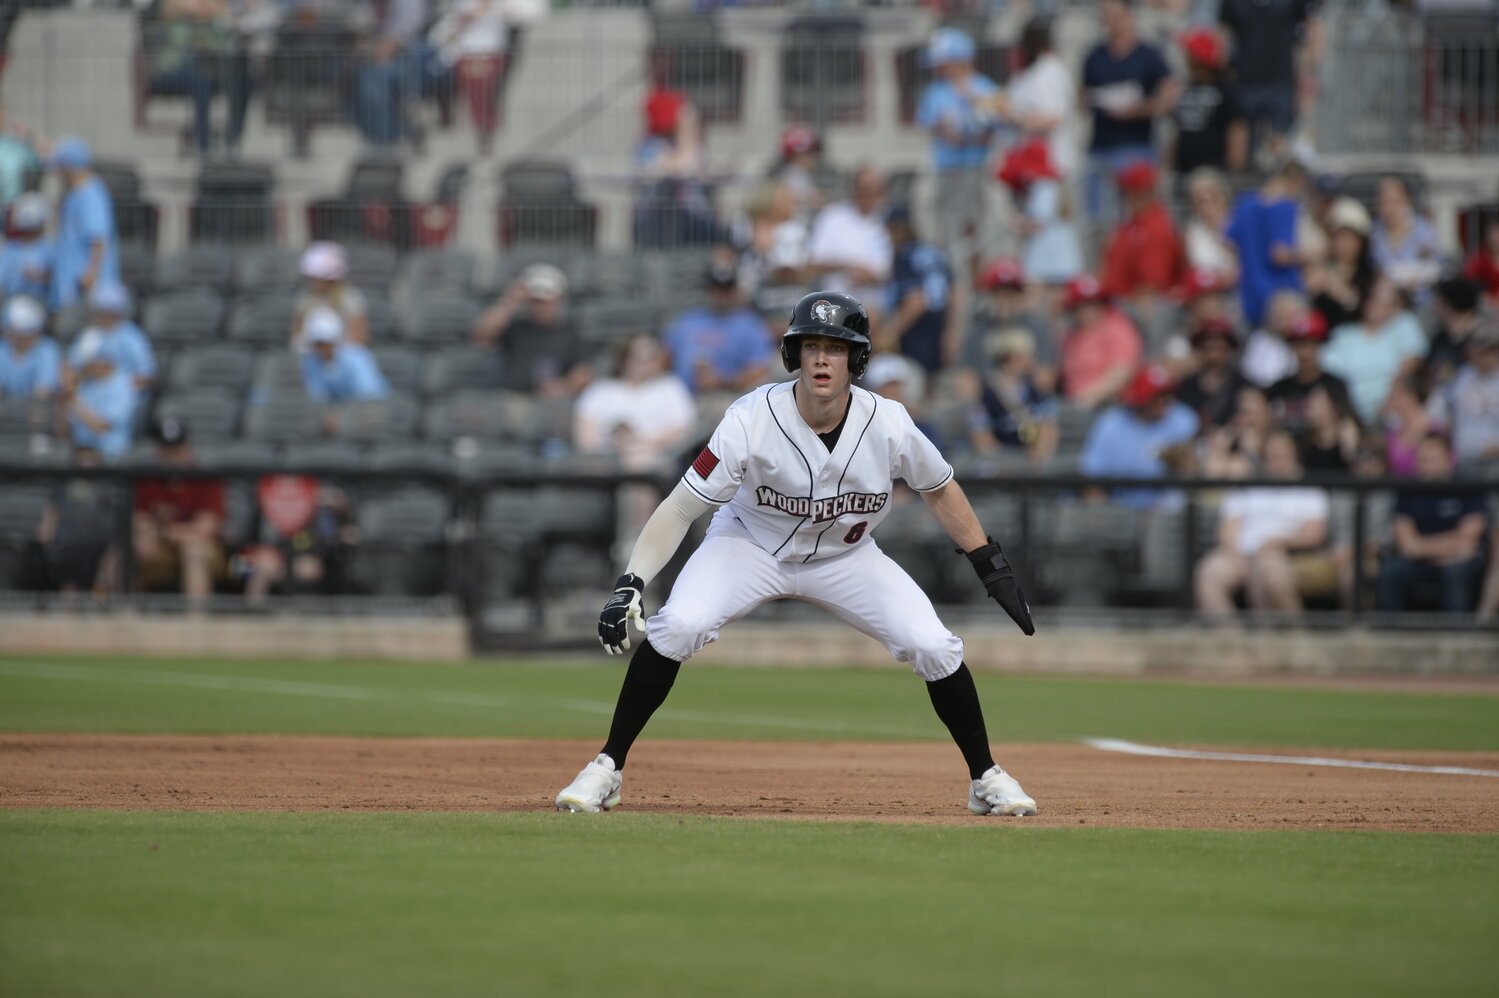 The Fayetteville Woodpeckers (21-32) bounced back in a big way on Wednesday at Five County Stadium as they won a pair of seven-inning  games against the Carolina Mudcats (30-21).